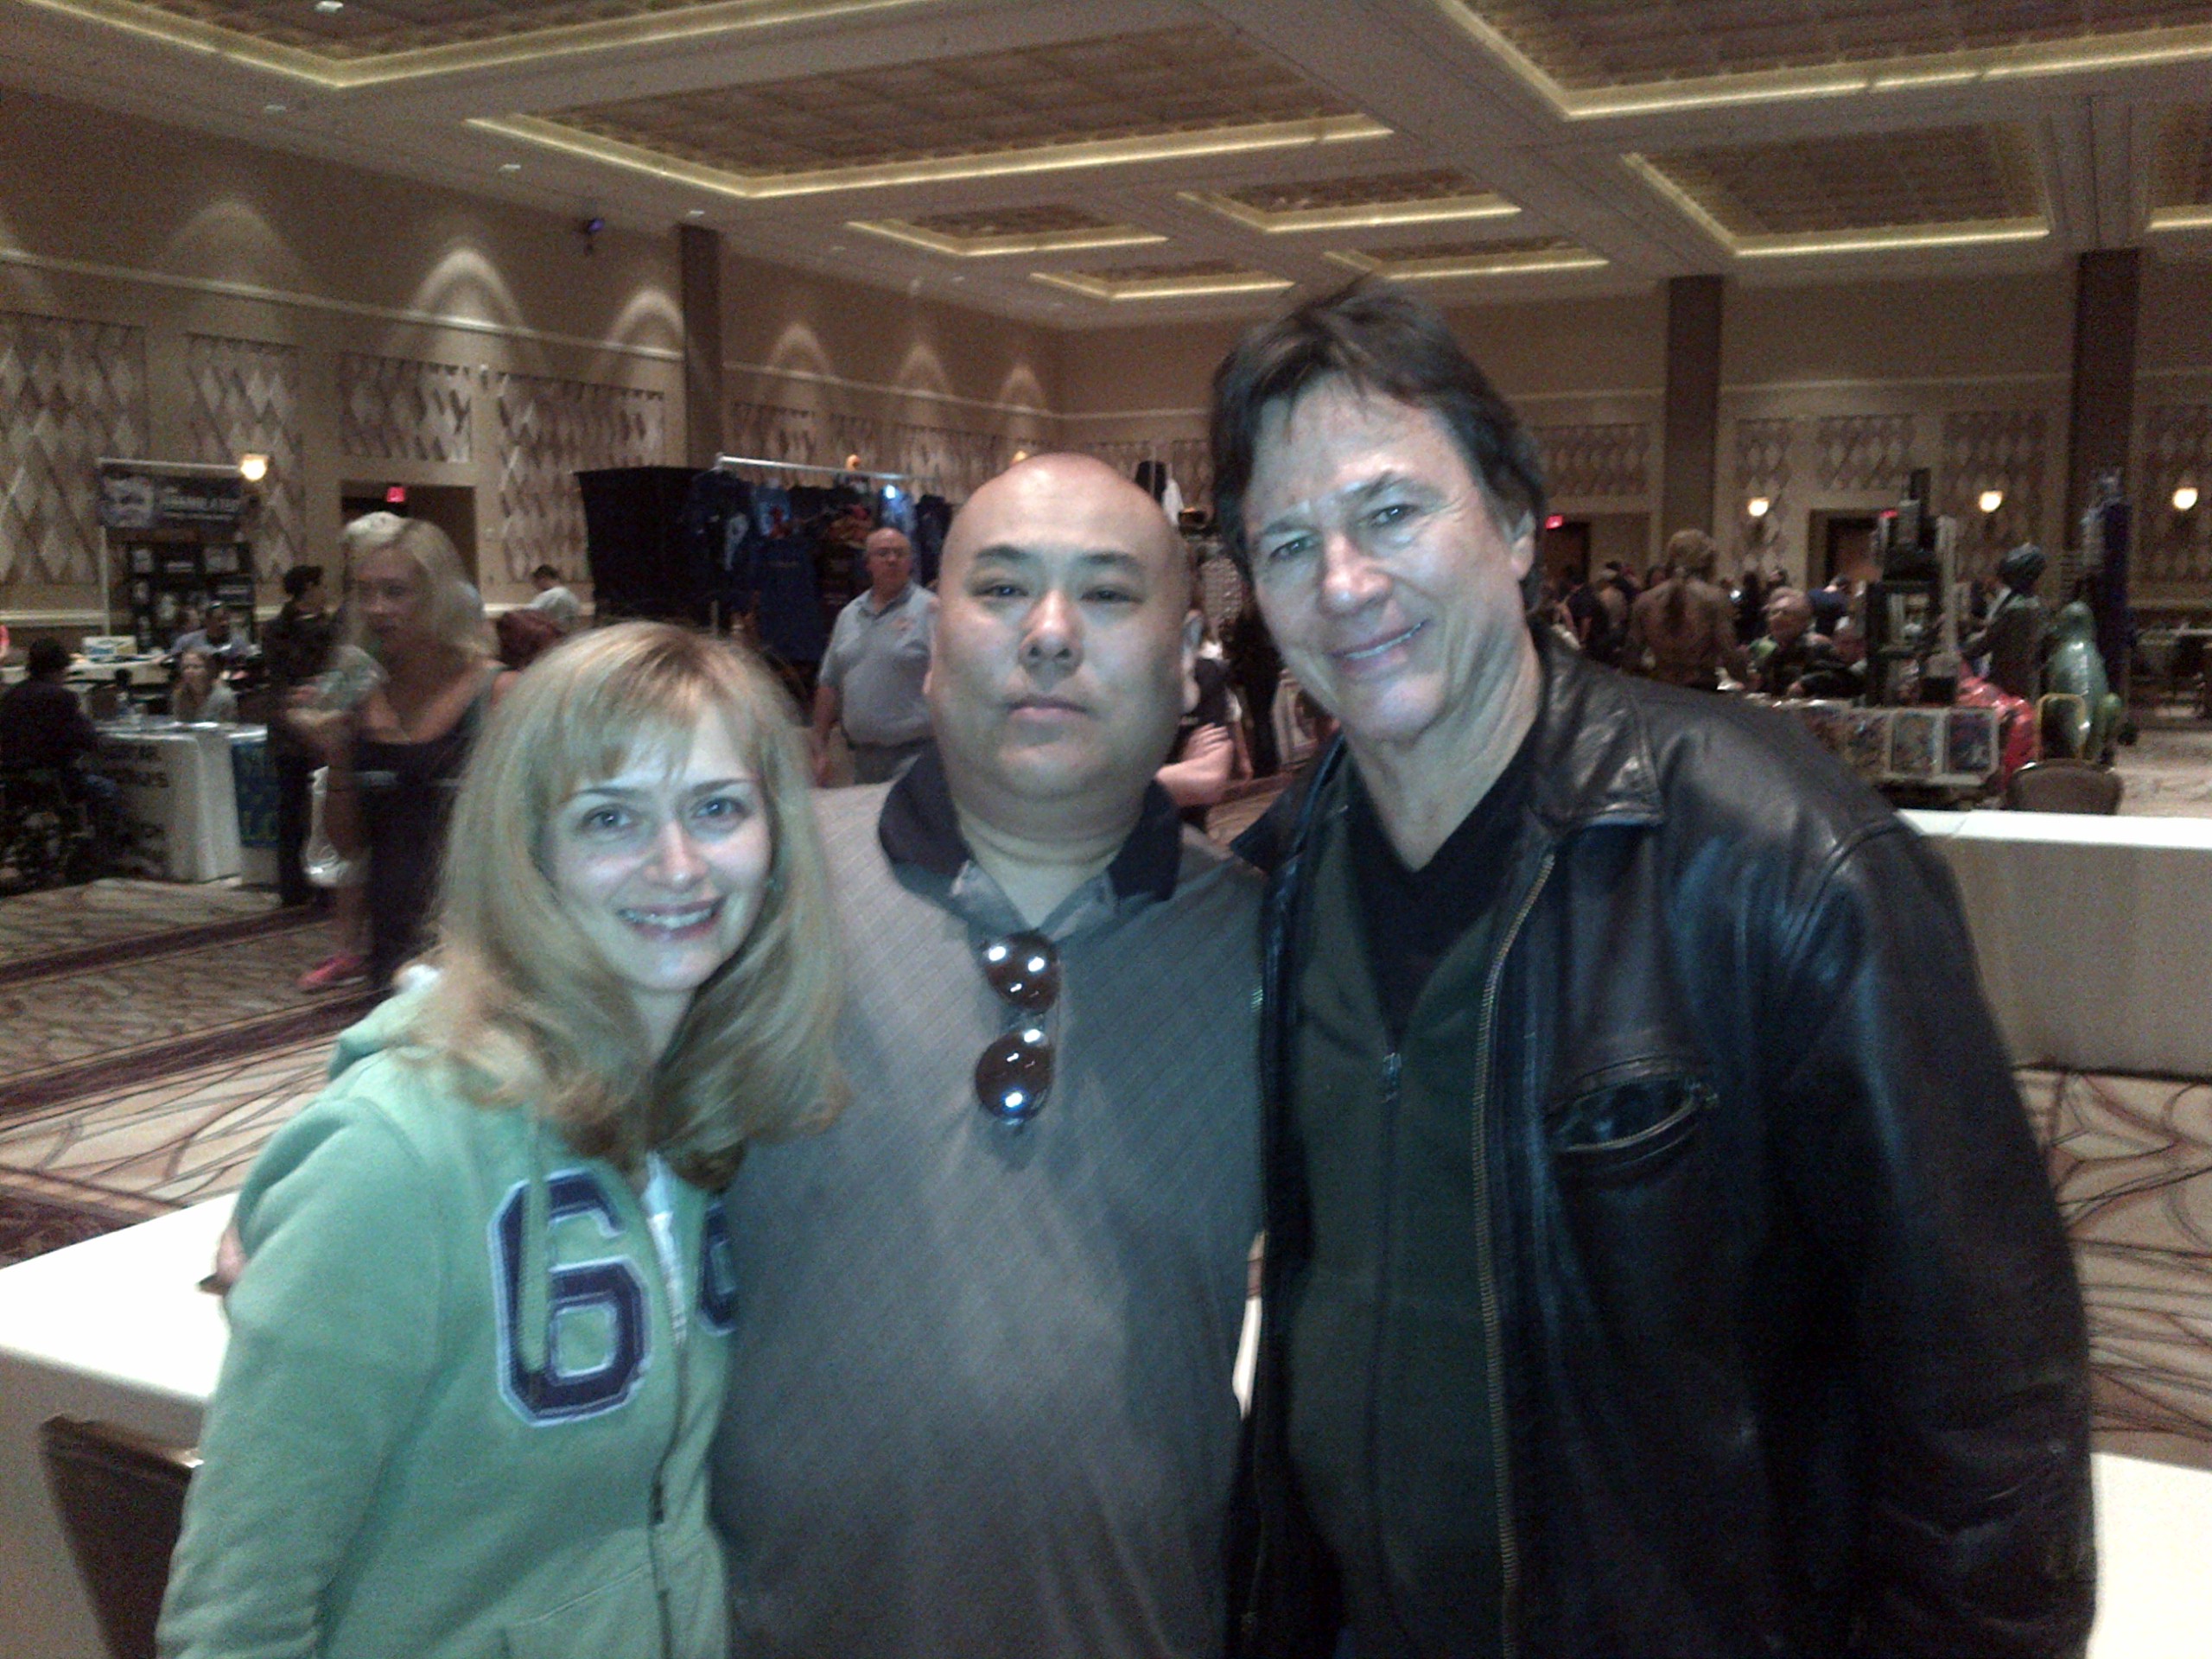 Richard Imon with actor Richard Hatch and friend Josefine Nagy of Germany. Richard Hatch was an actor in Battle Star Galactica.